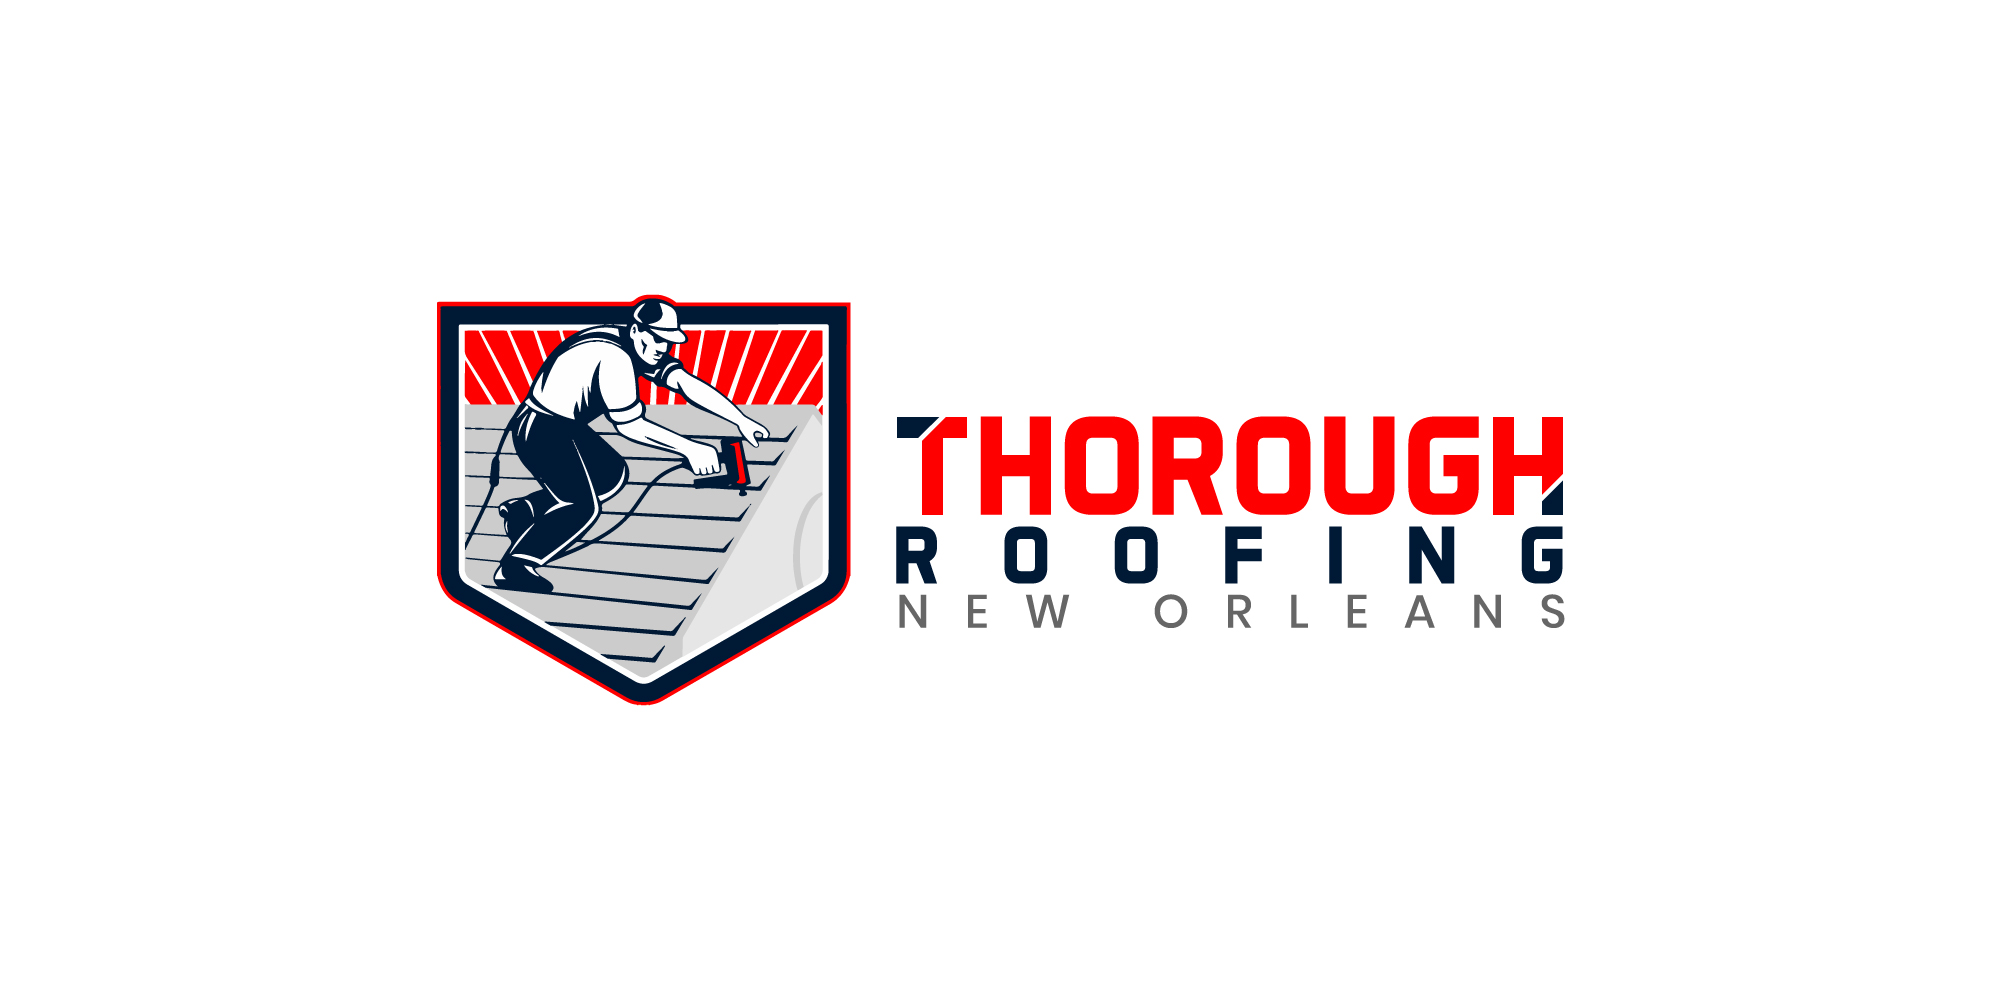 Thorough Roofing New Orleans's Logo